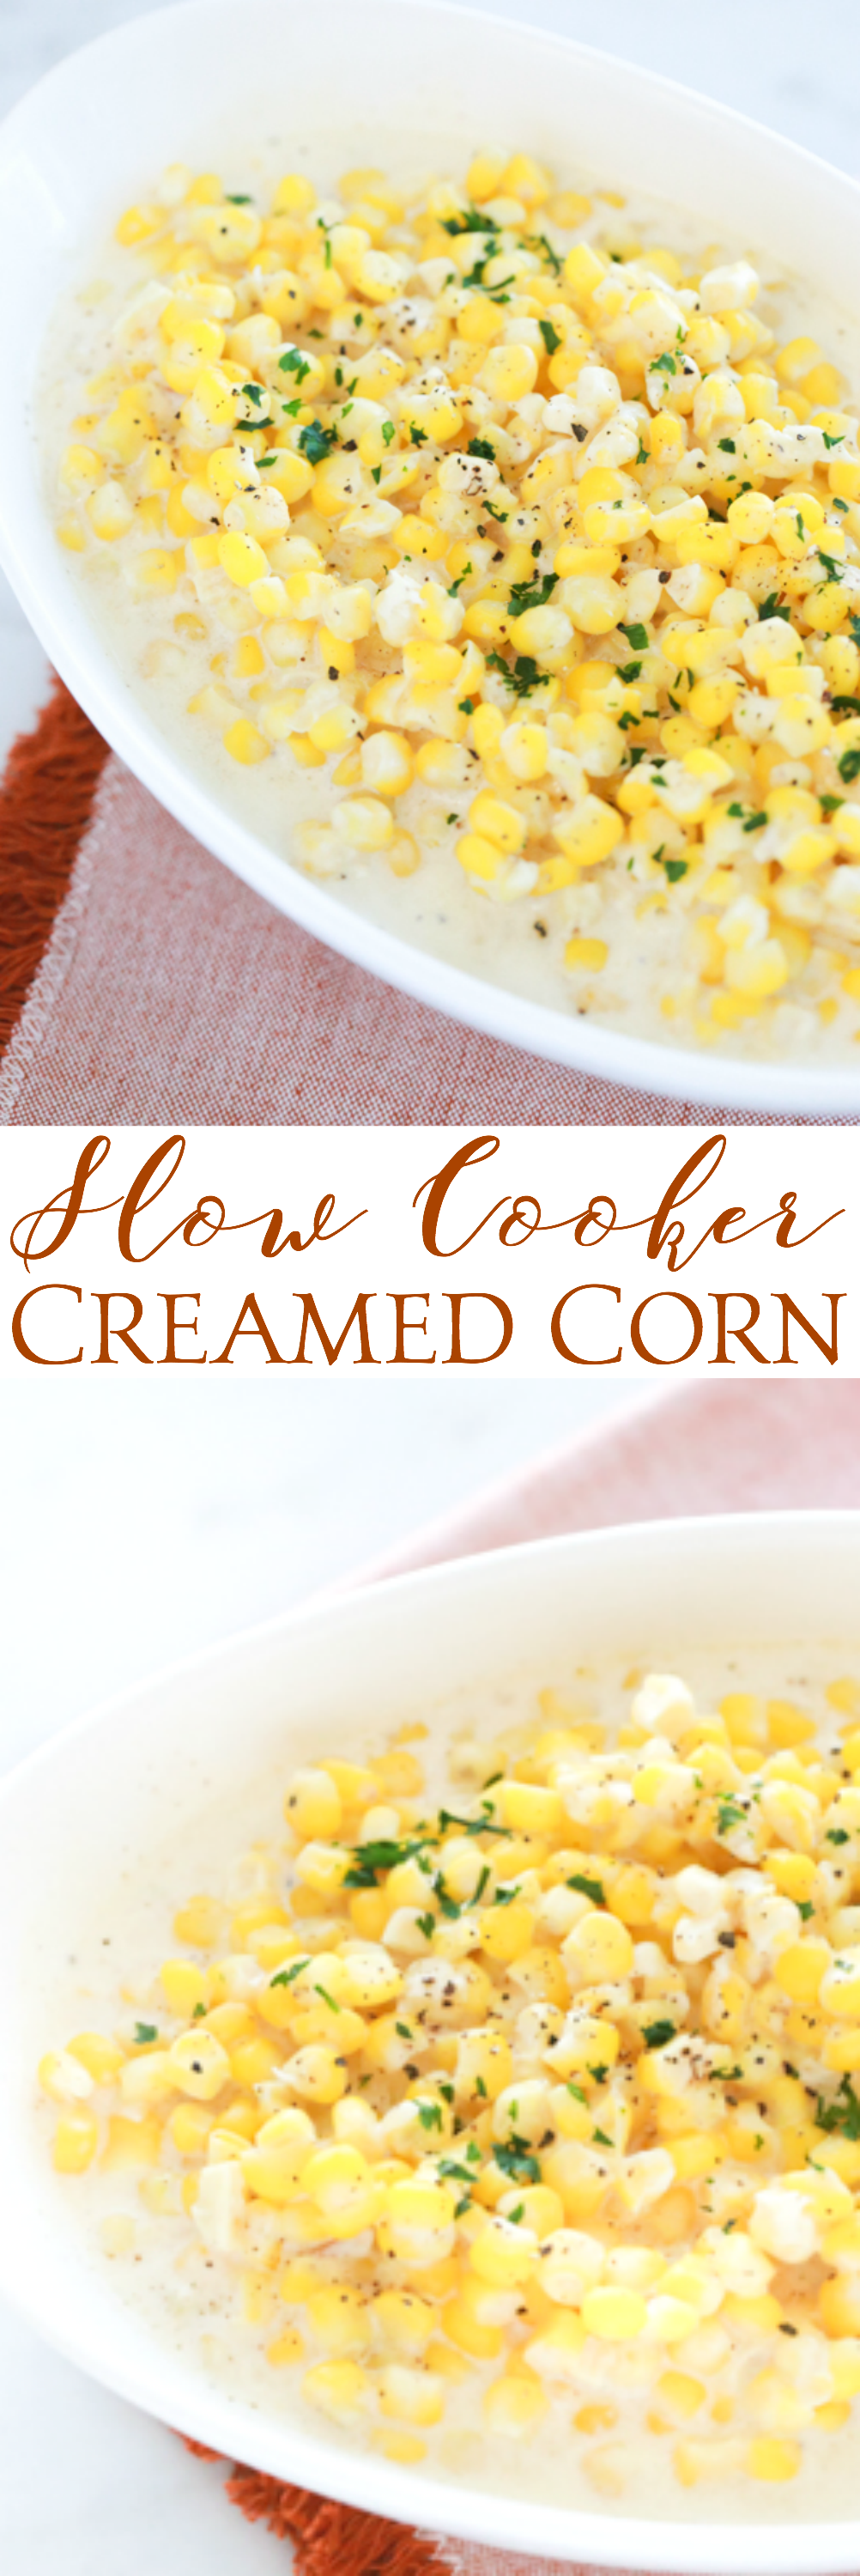 how to make creamed corn in the slow cooker